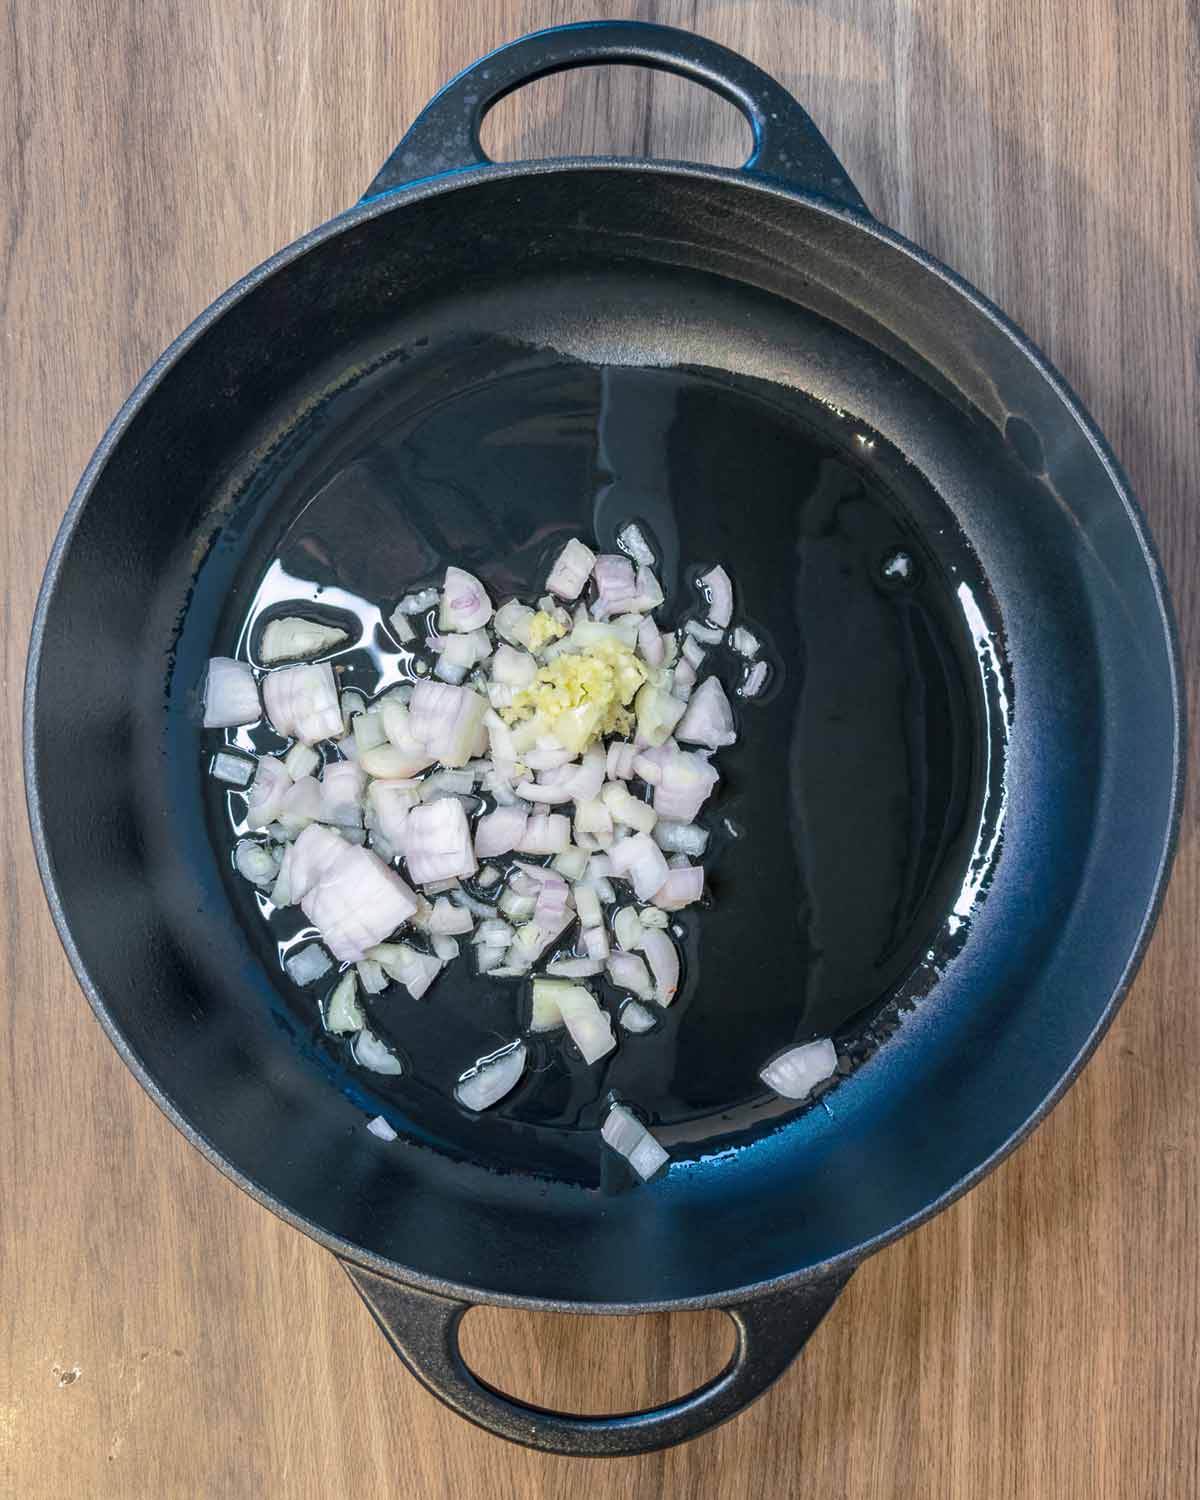 Chopped shallots cooking in some oil in a large black pan.